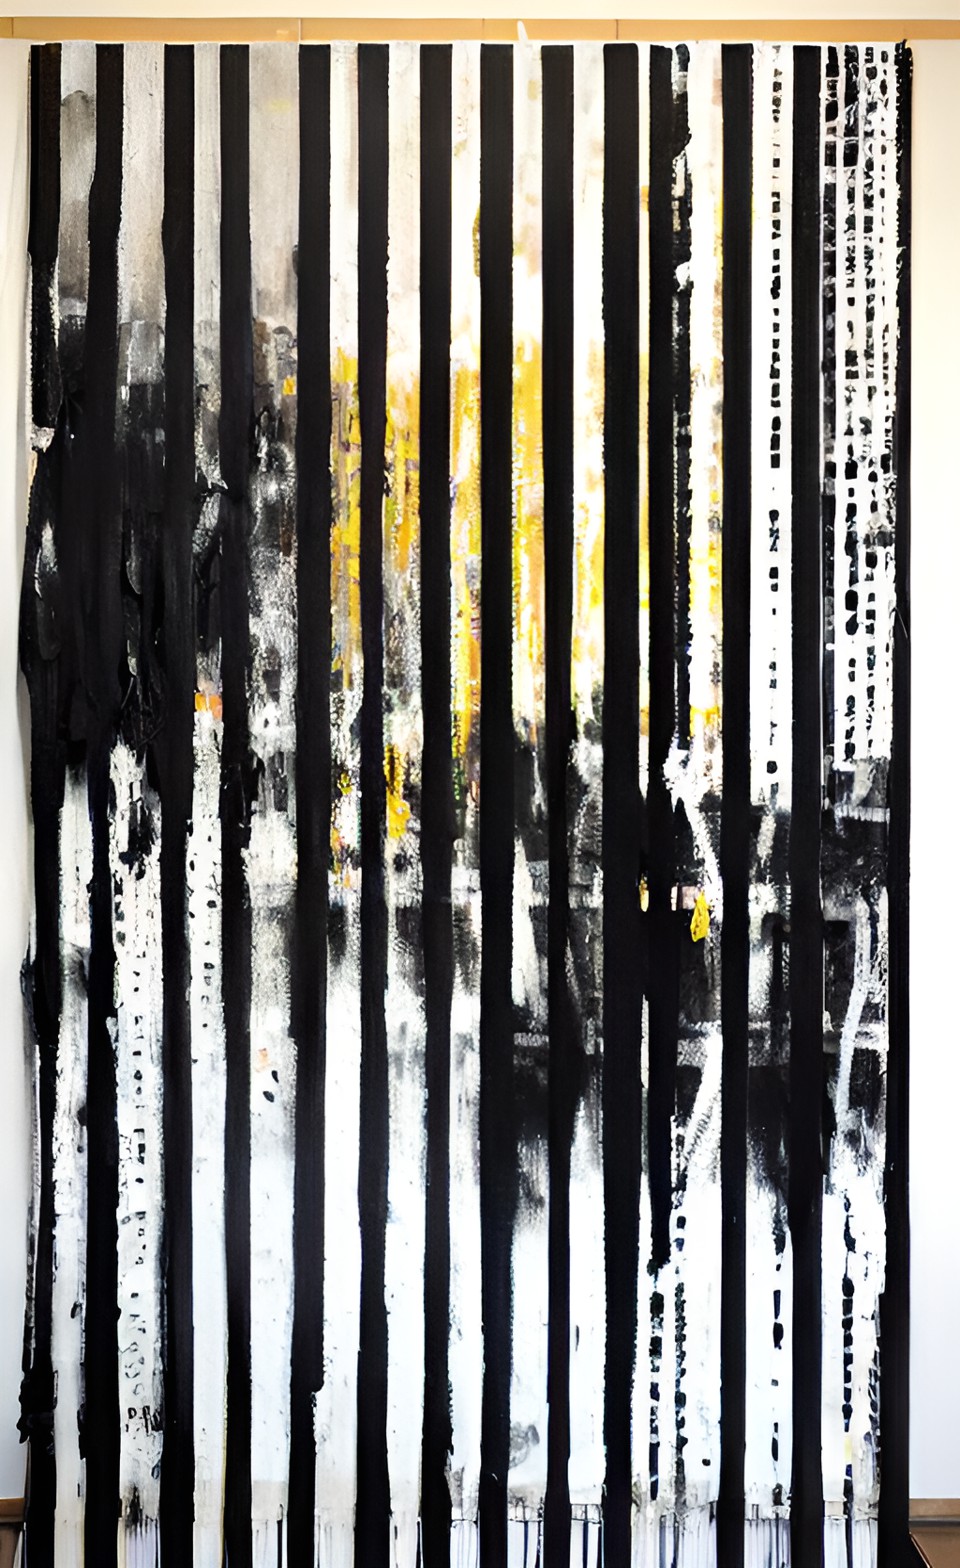 A painting partially covered with black censorship bars, representing the challenges of censorship and artistic freedom